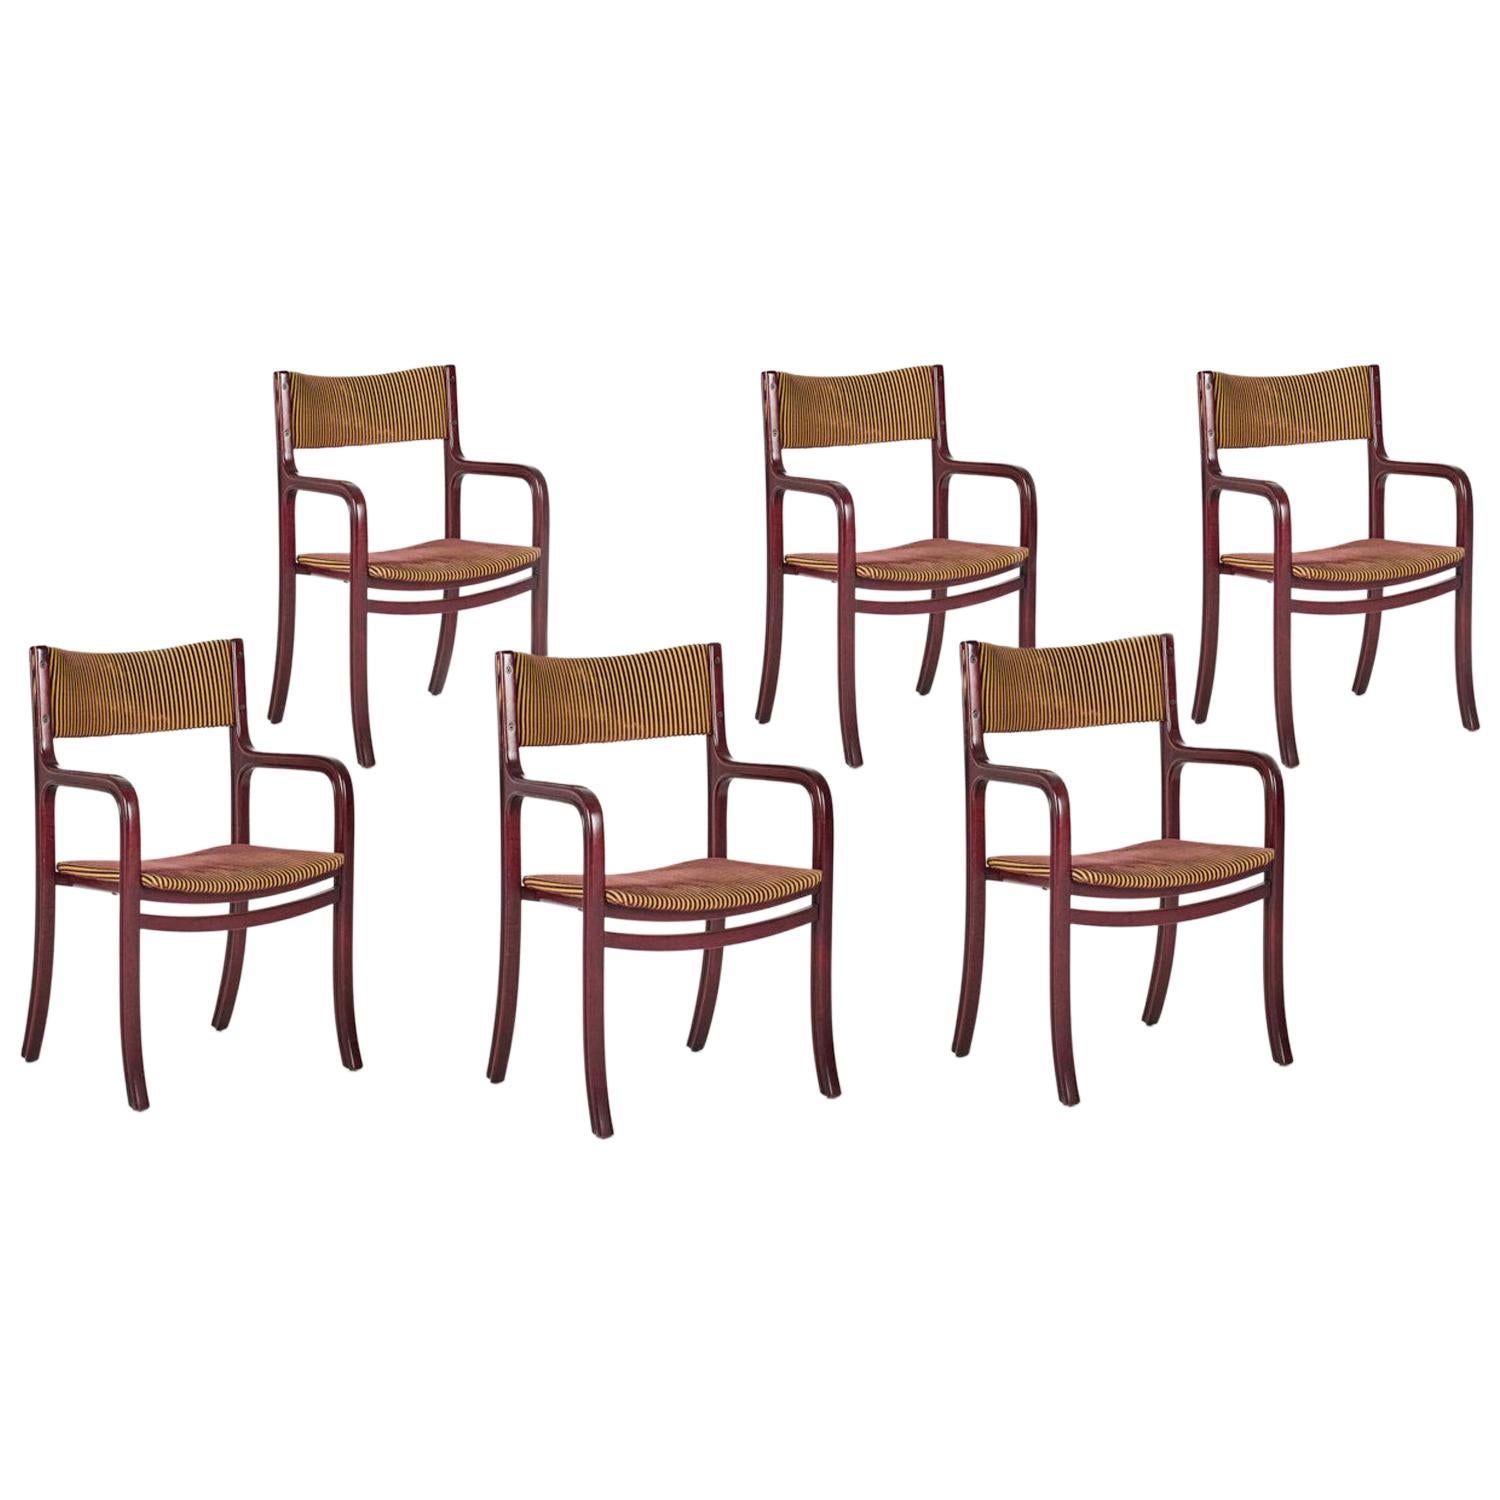 Set of Six Chairs by Gianfranco Frattini from the Late 1950's